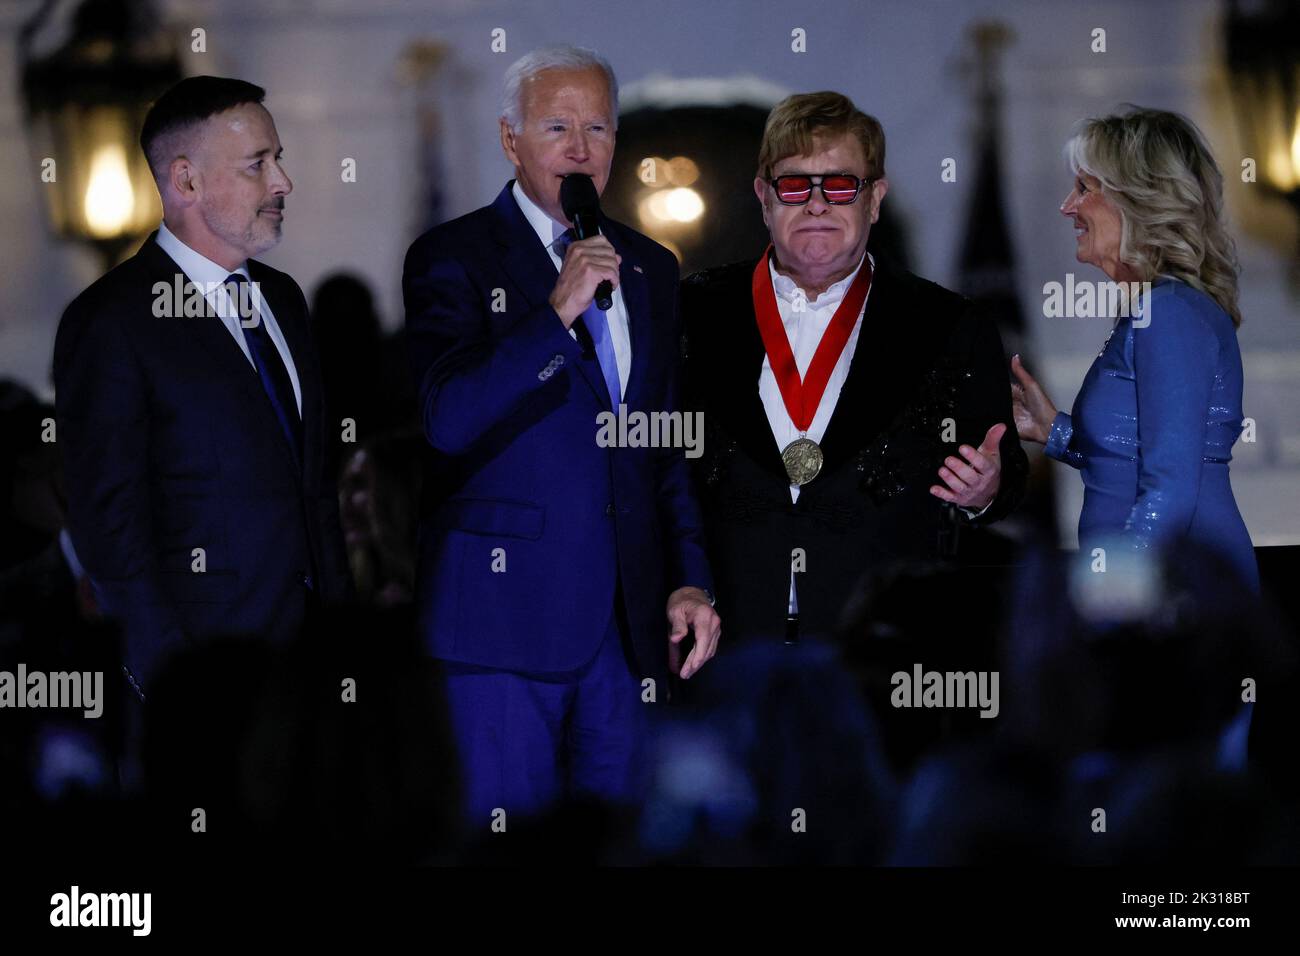 British rocker Elton John reacts after being awarded the National Humanities Medal by U.S. President Joe Biden and U.S. first lady Jill Biden at the White House in Washington, U.S., September 23, 2022. REUTERS/Evelyn Hockstein Stock Photo